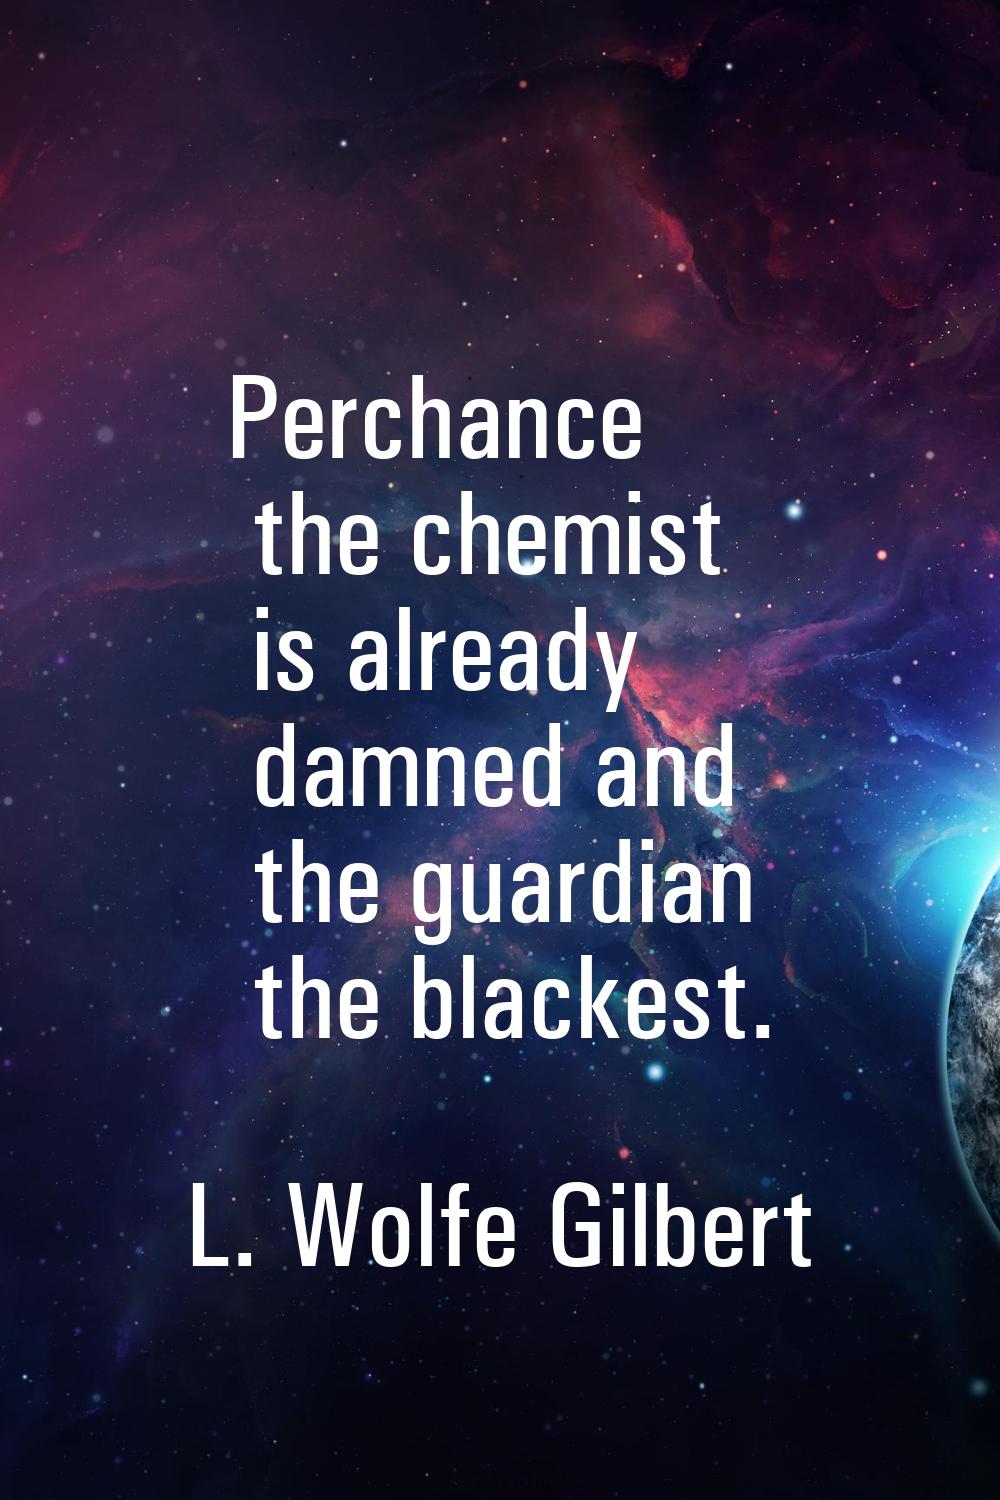 Perchance the chemist is already damned and the guardian the blackest.